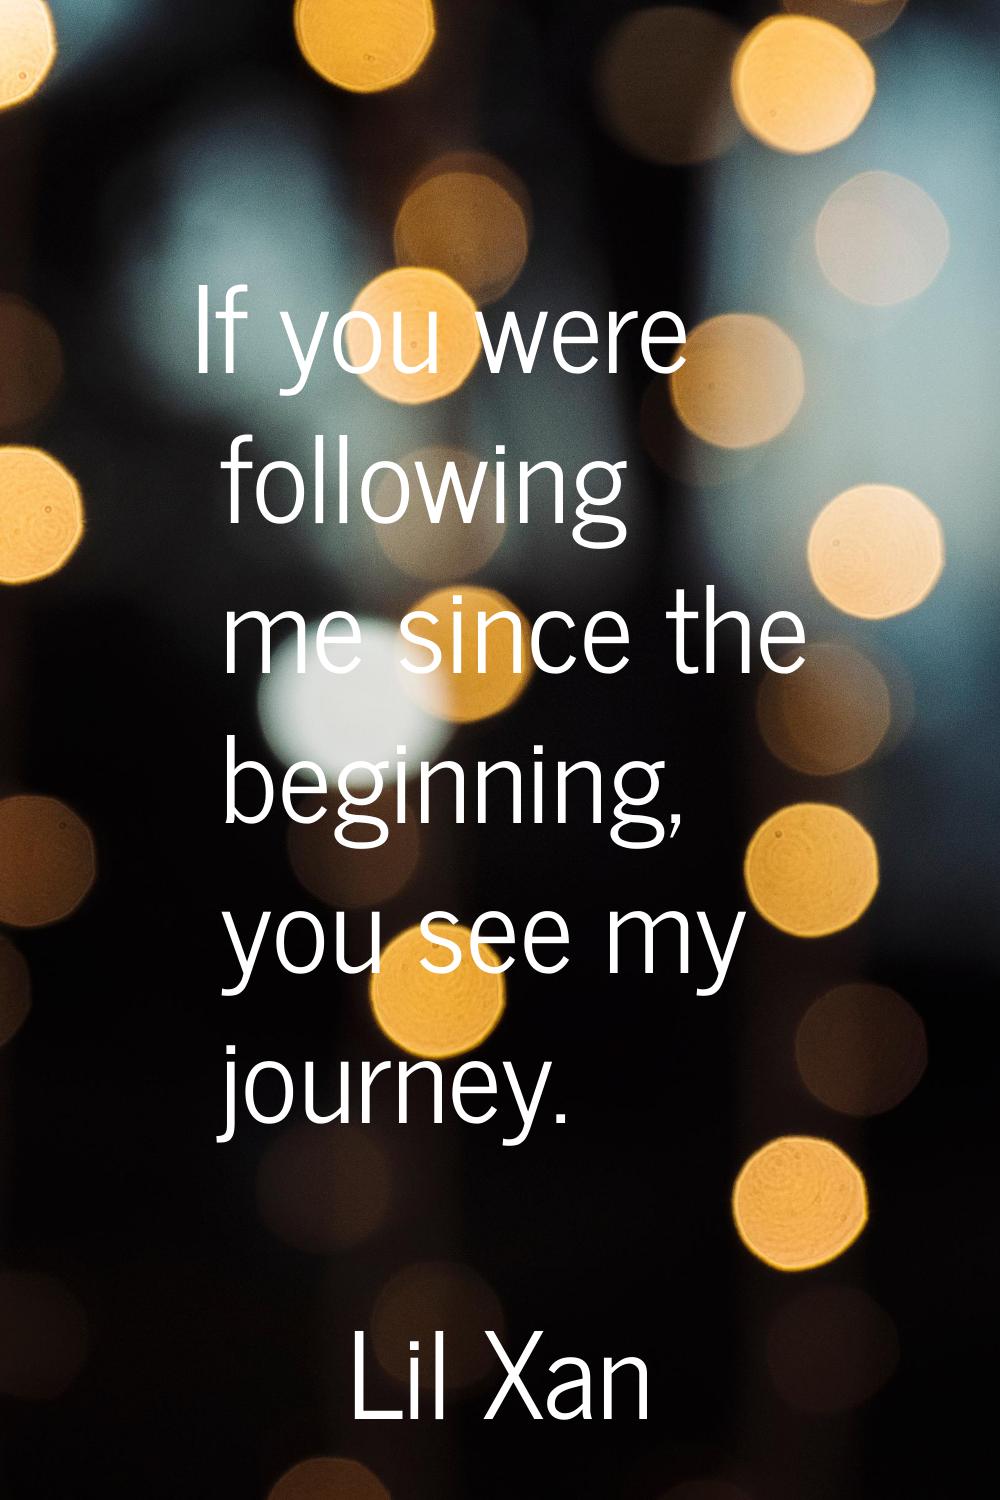 If you were following me since the beginning, you see my journey.